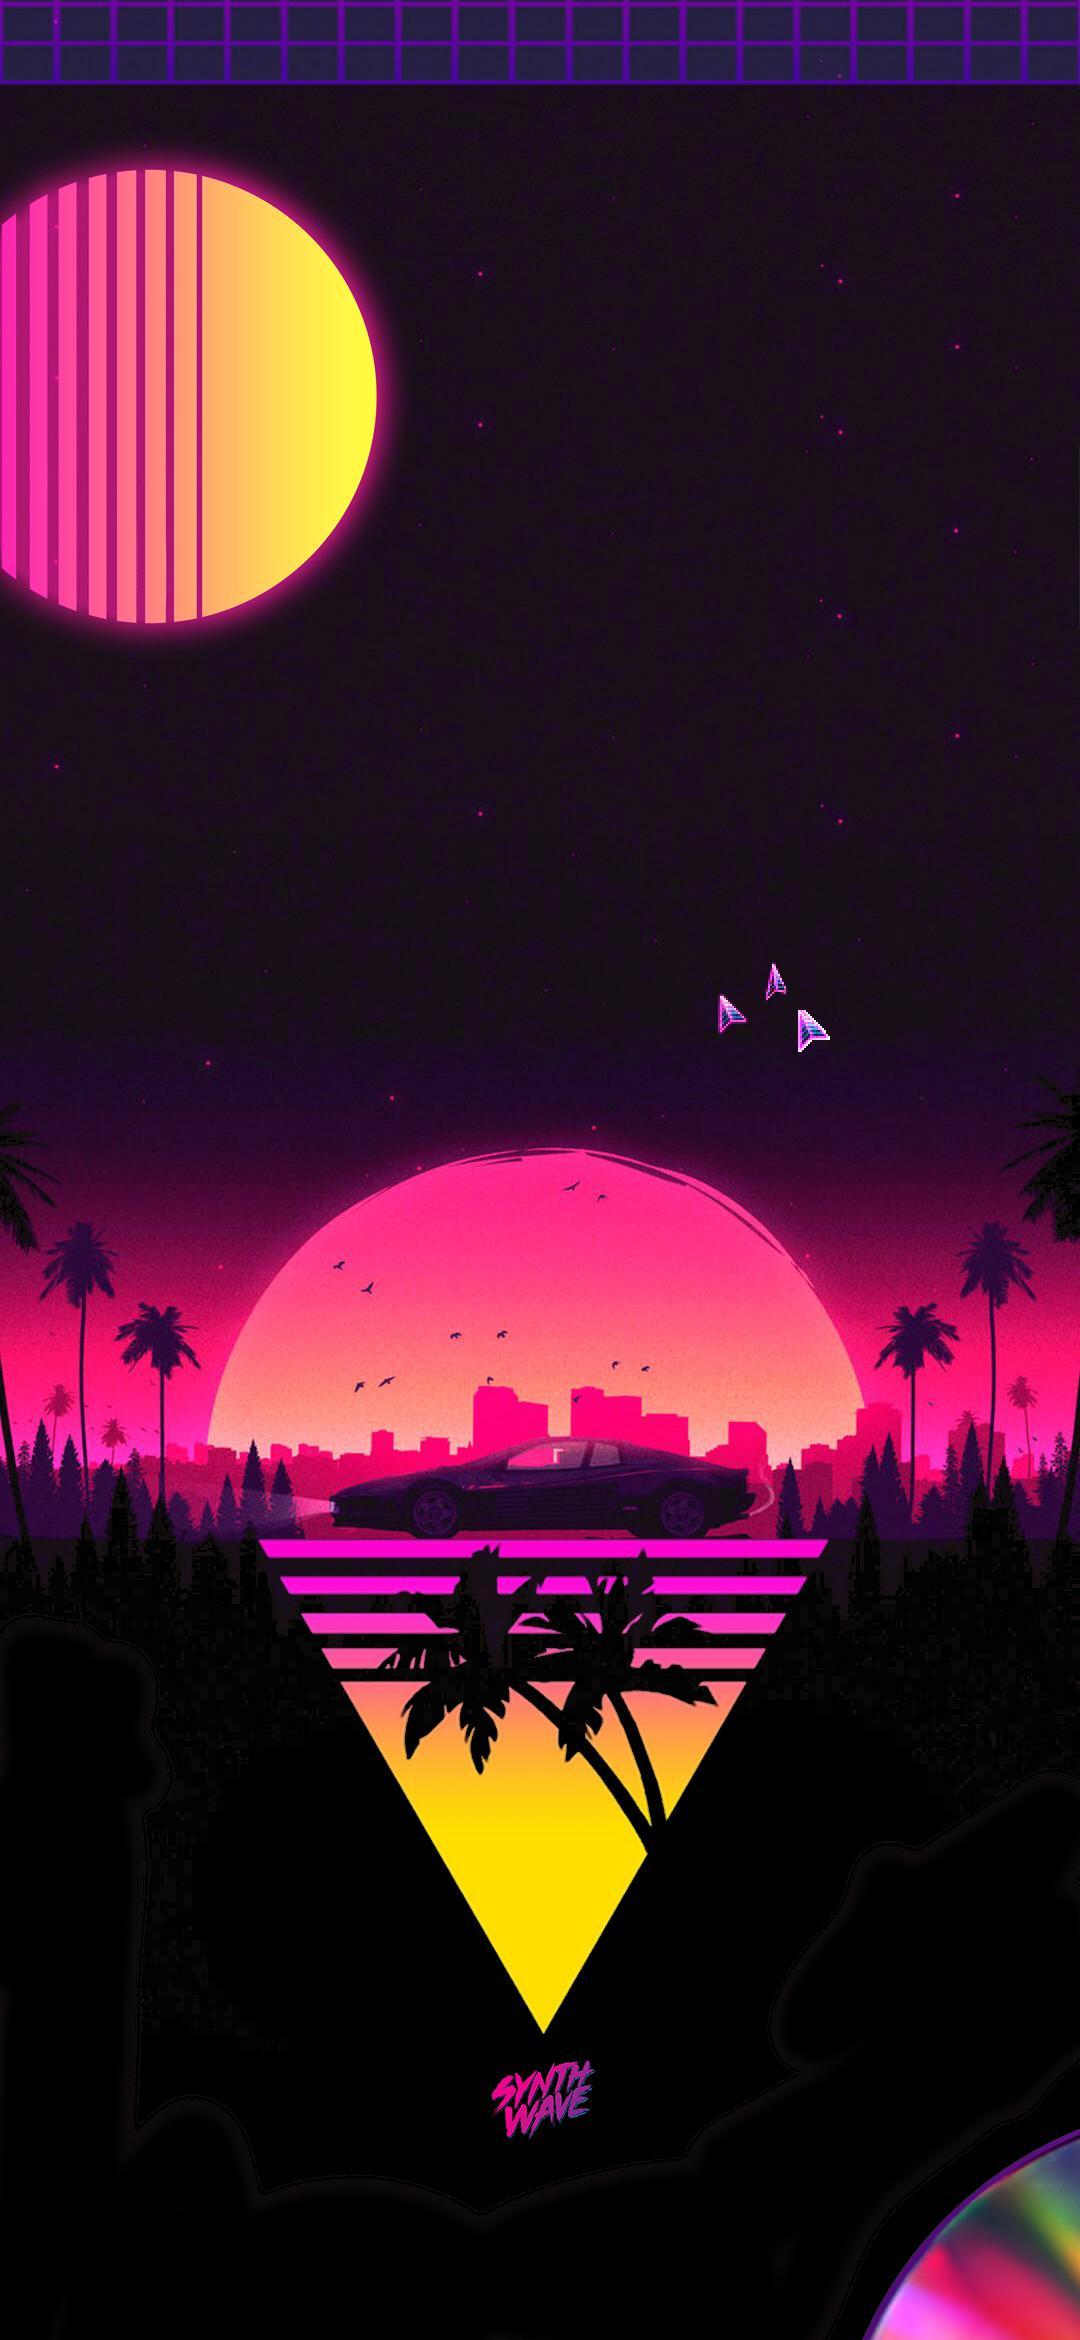 Synth Wave Mobile Wallpaper I designed for my lockscreen